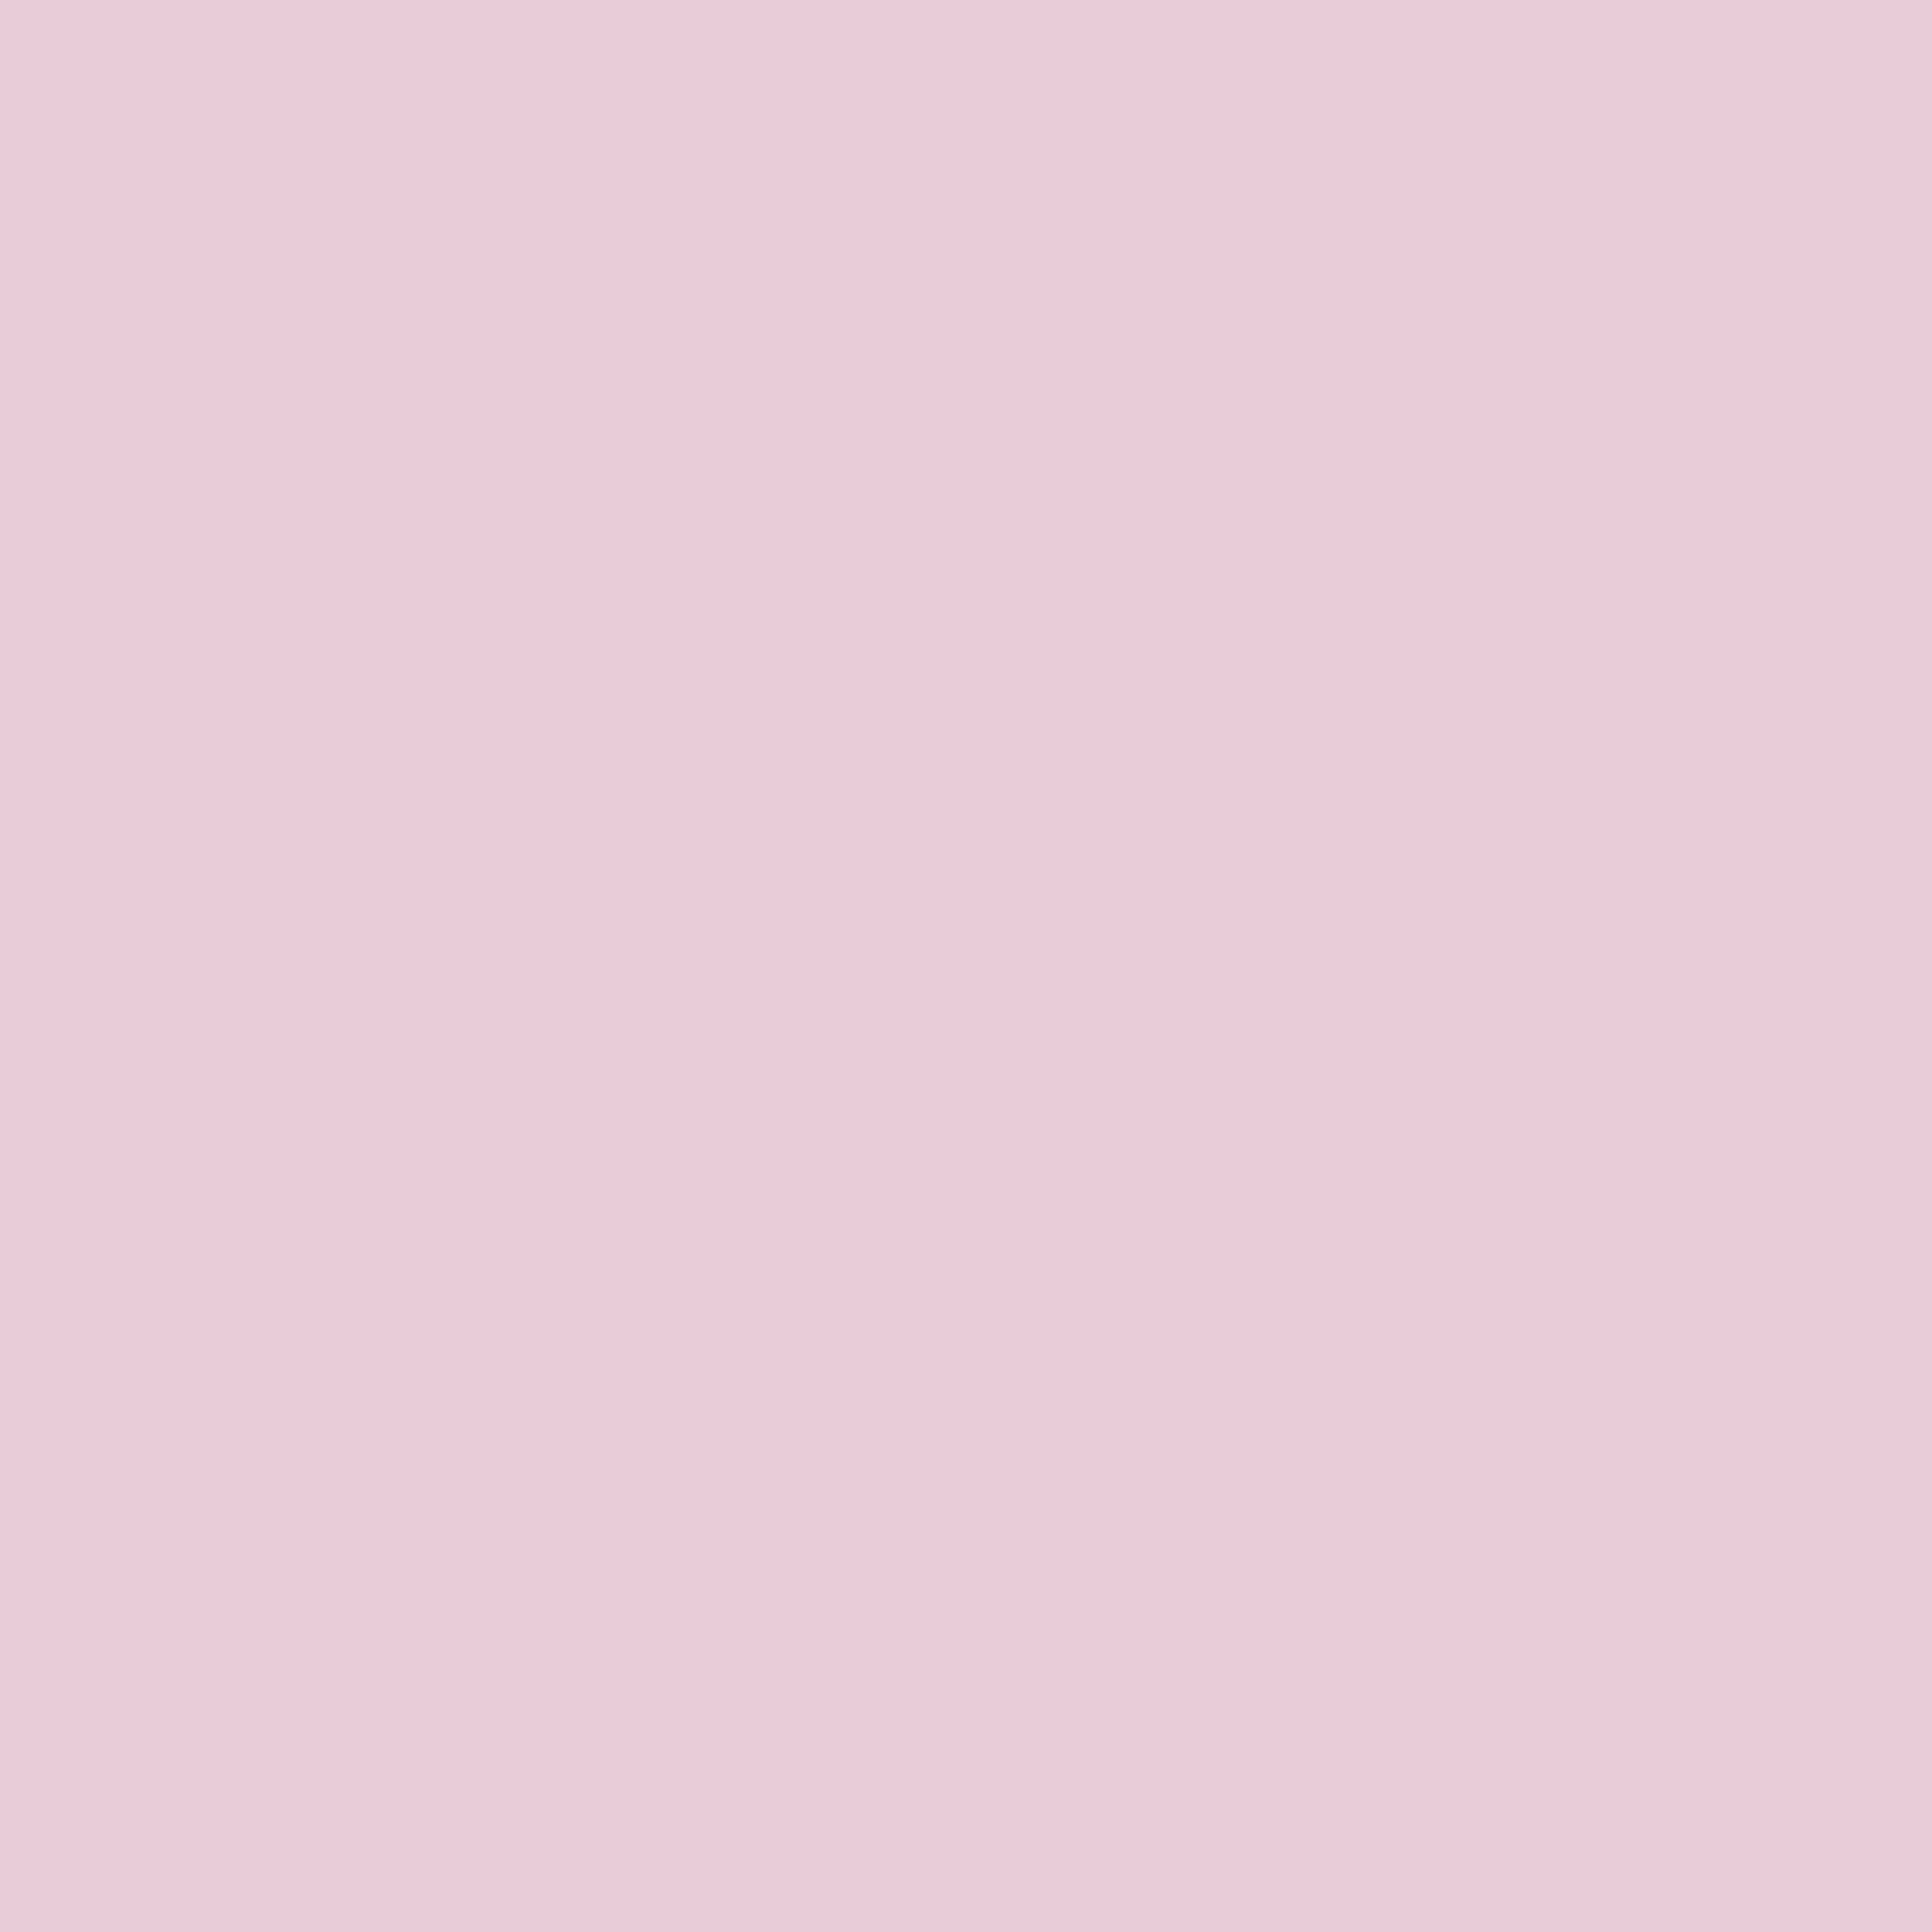 3600x3600 Queen Pink Solid Color Background